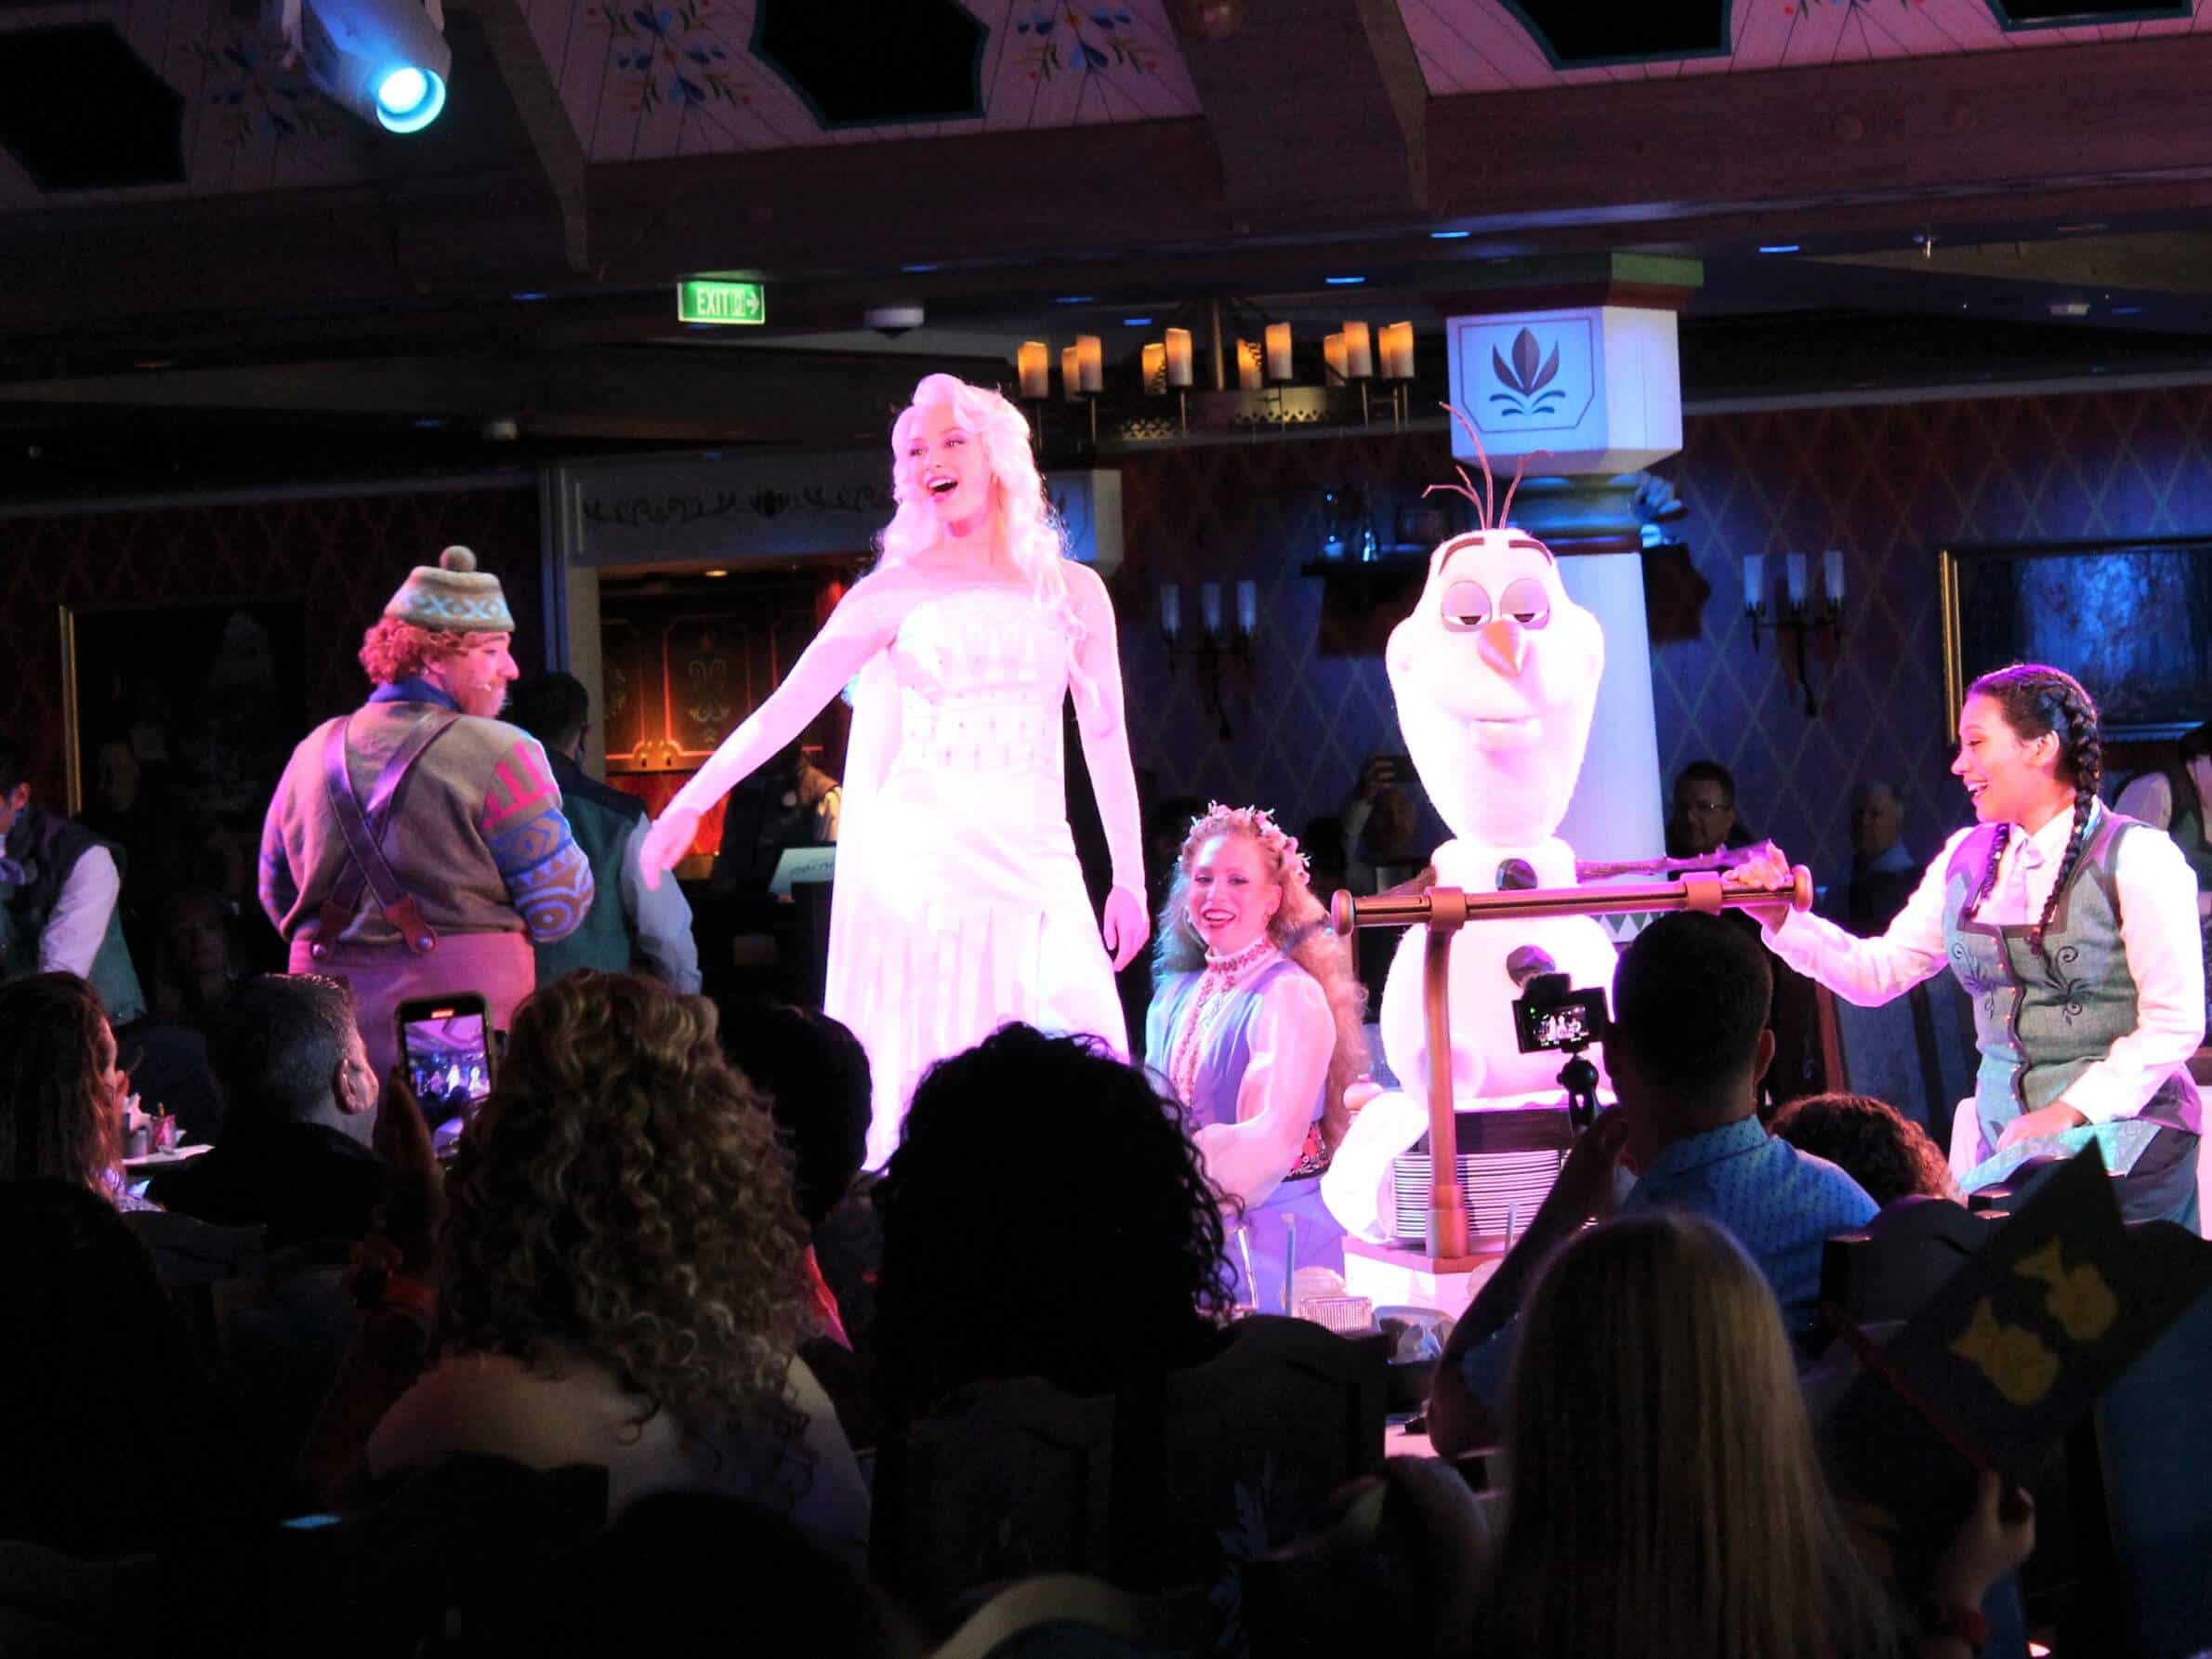 Elsa performs on a stage with an Olaf character at Arendelle Frozen Dining Adventure on Disney Wish